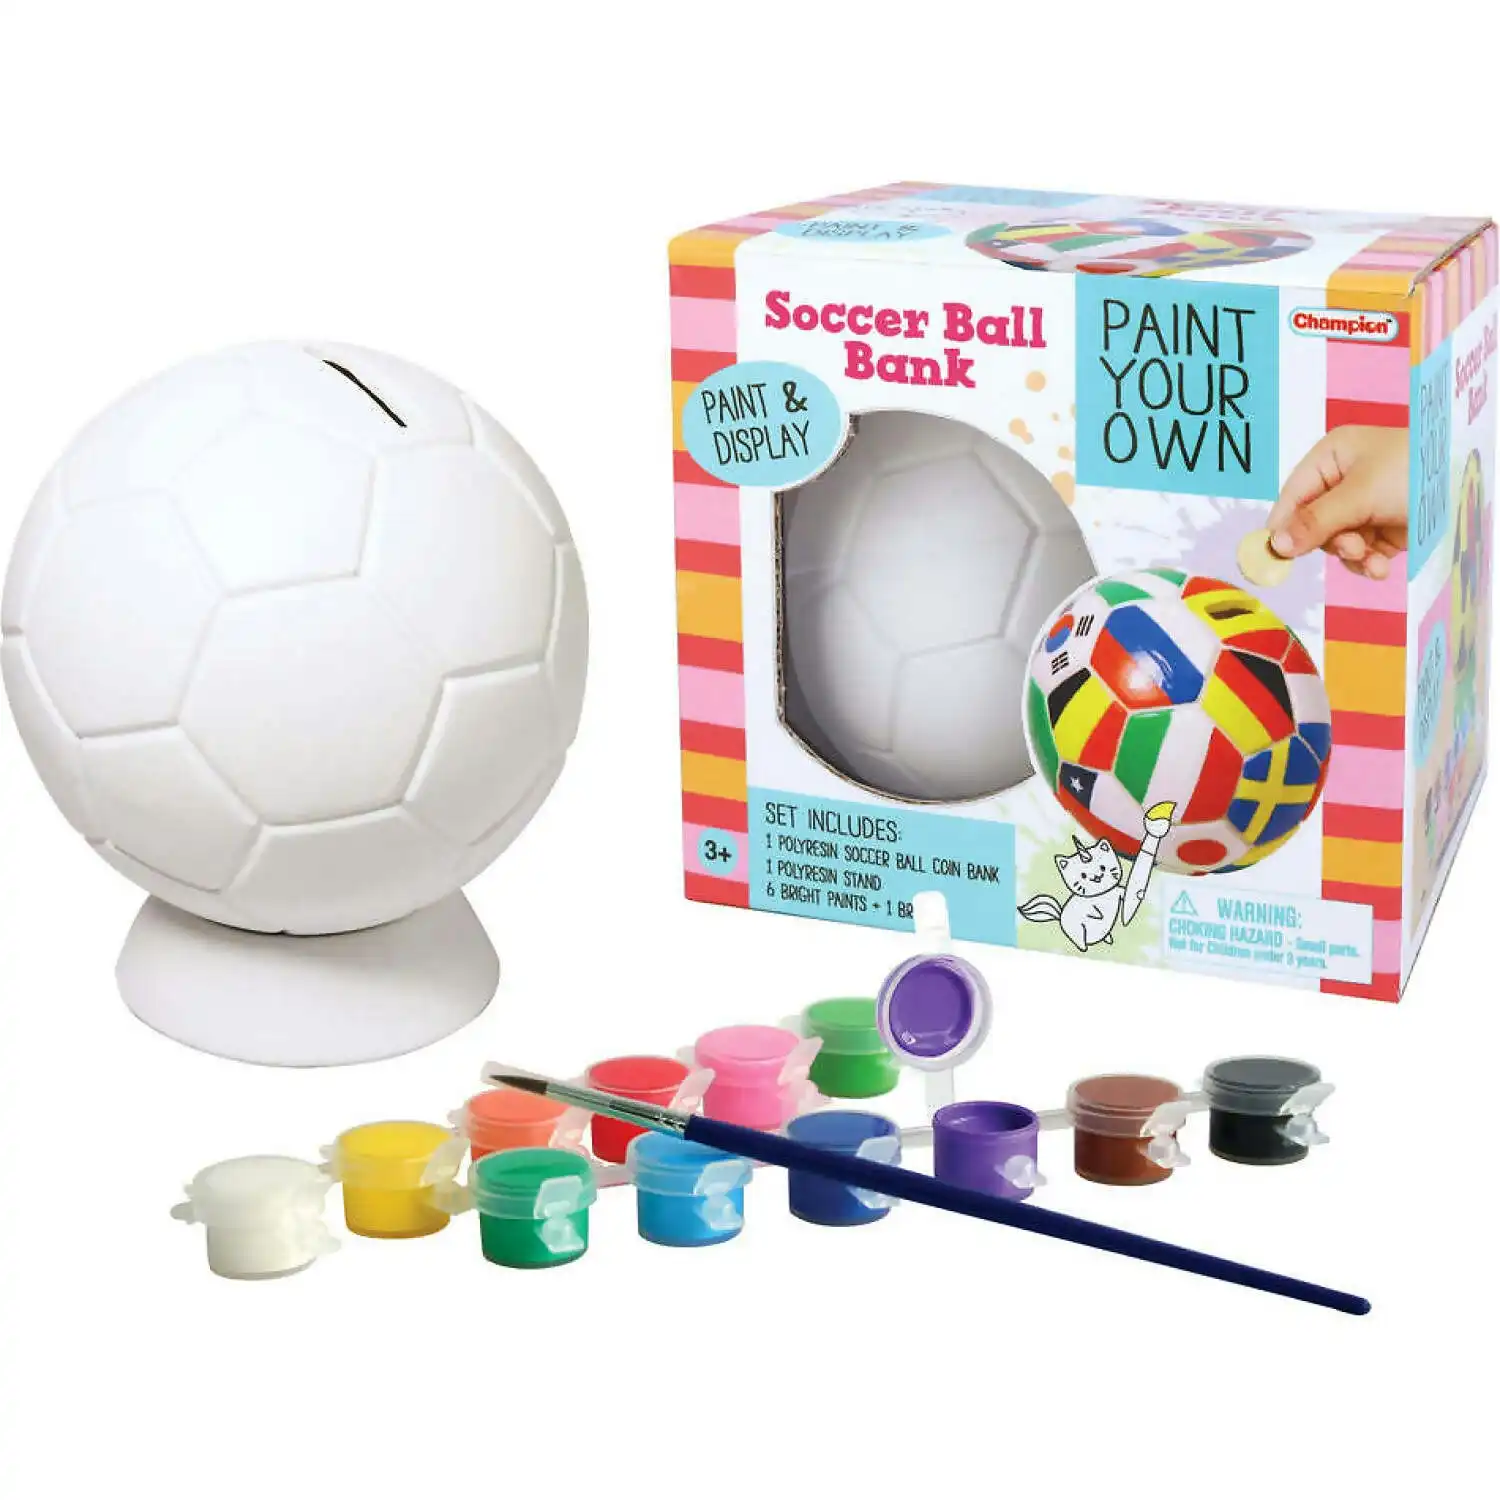 Champion - Paint Your Own Soccer Ball Bank